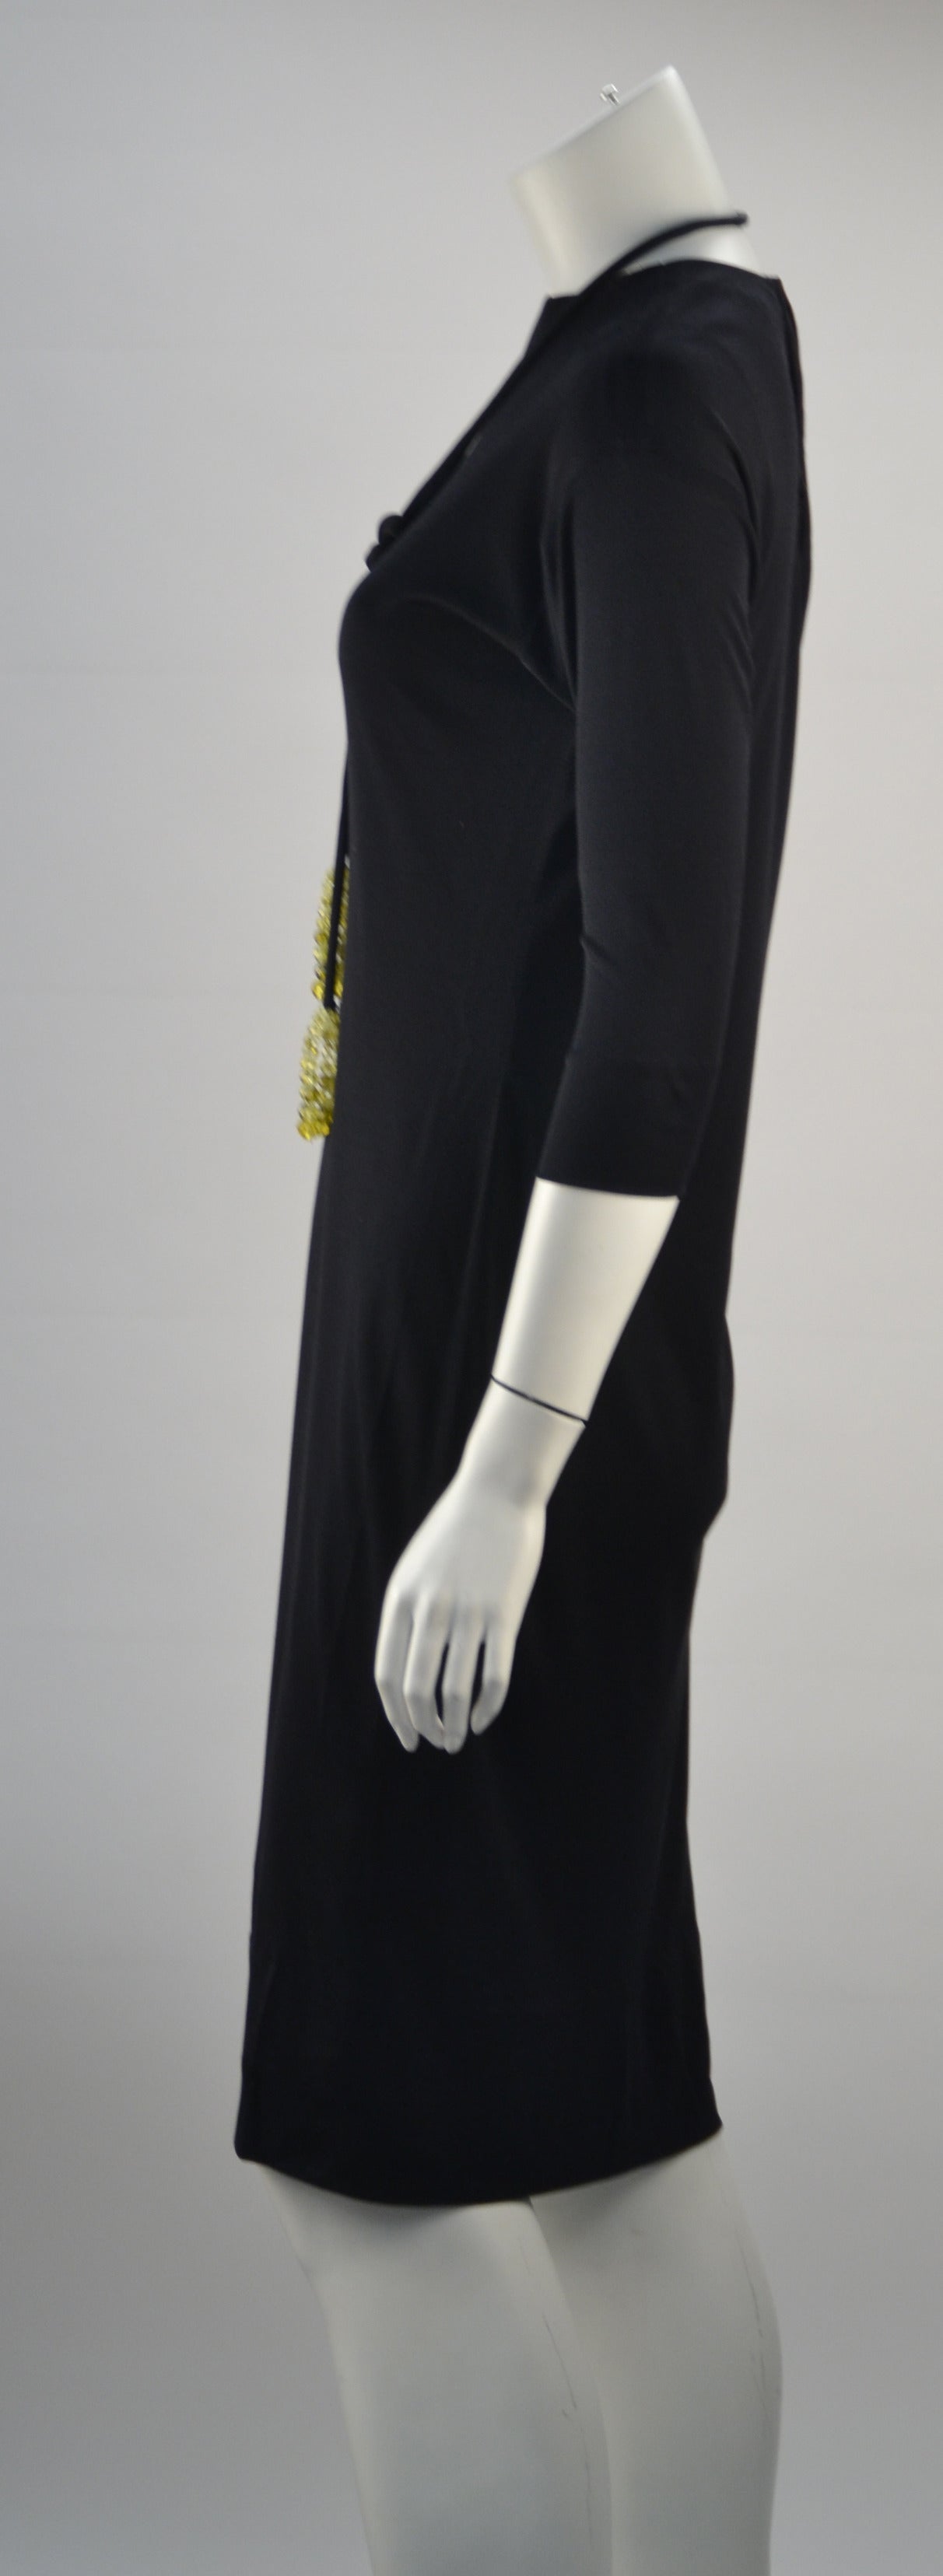 Simply Chic, Black Pucci silk knit dress (One of three). It can be worn any season, any time of day. Throw a blazer over it for work or a pair of high heels to go out at night!. The belt, with its Coppola e Toppo crystal beaded tassels, looks great